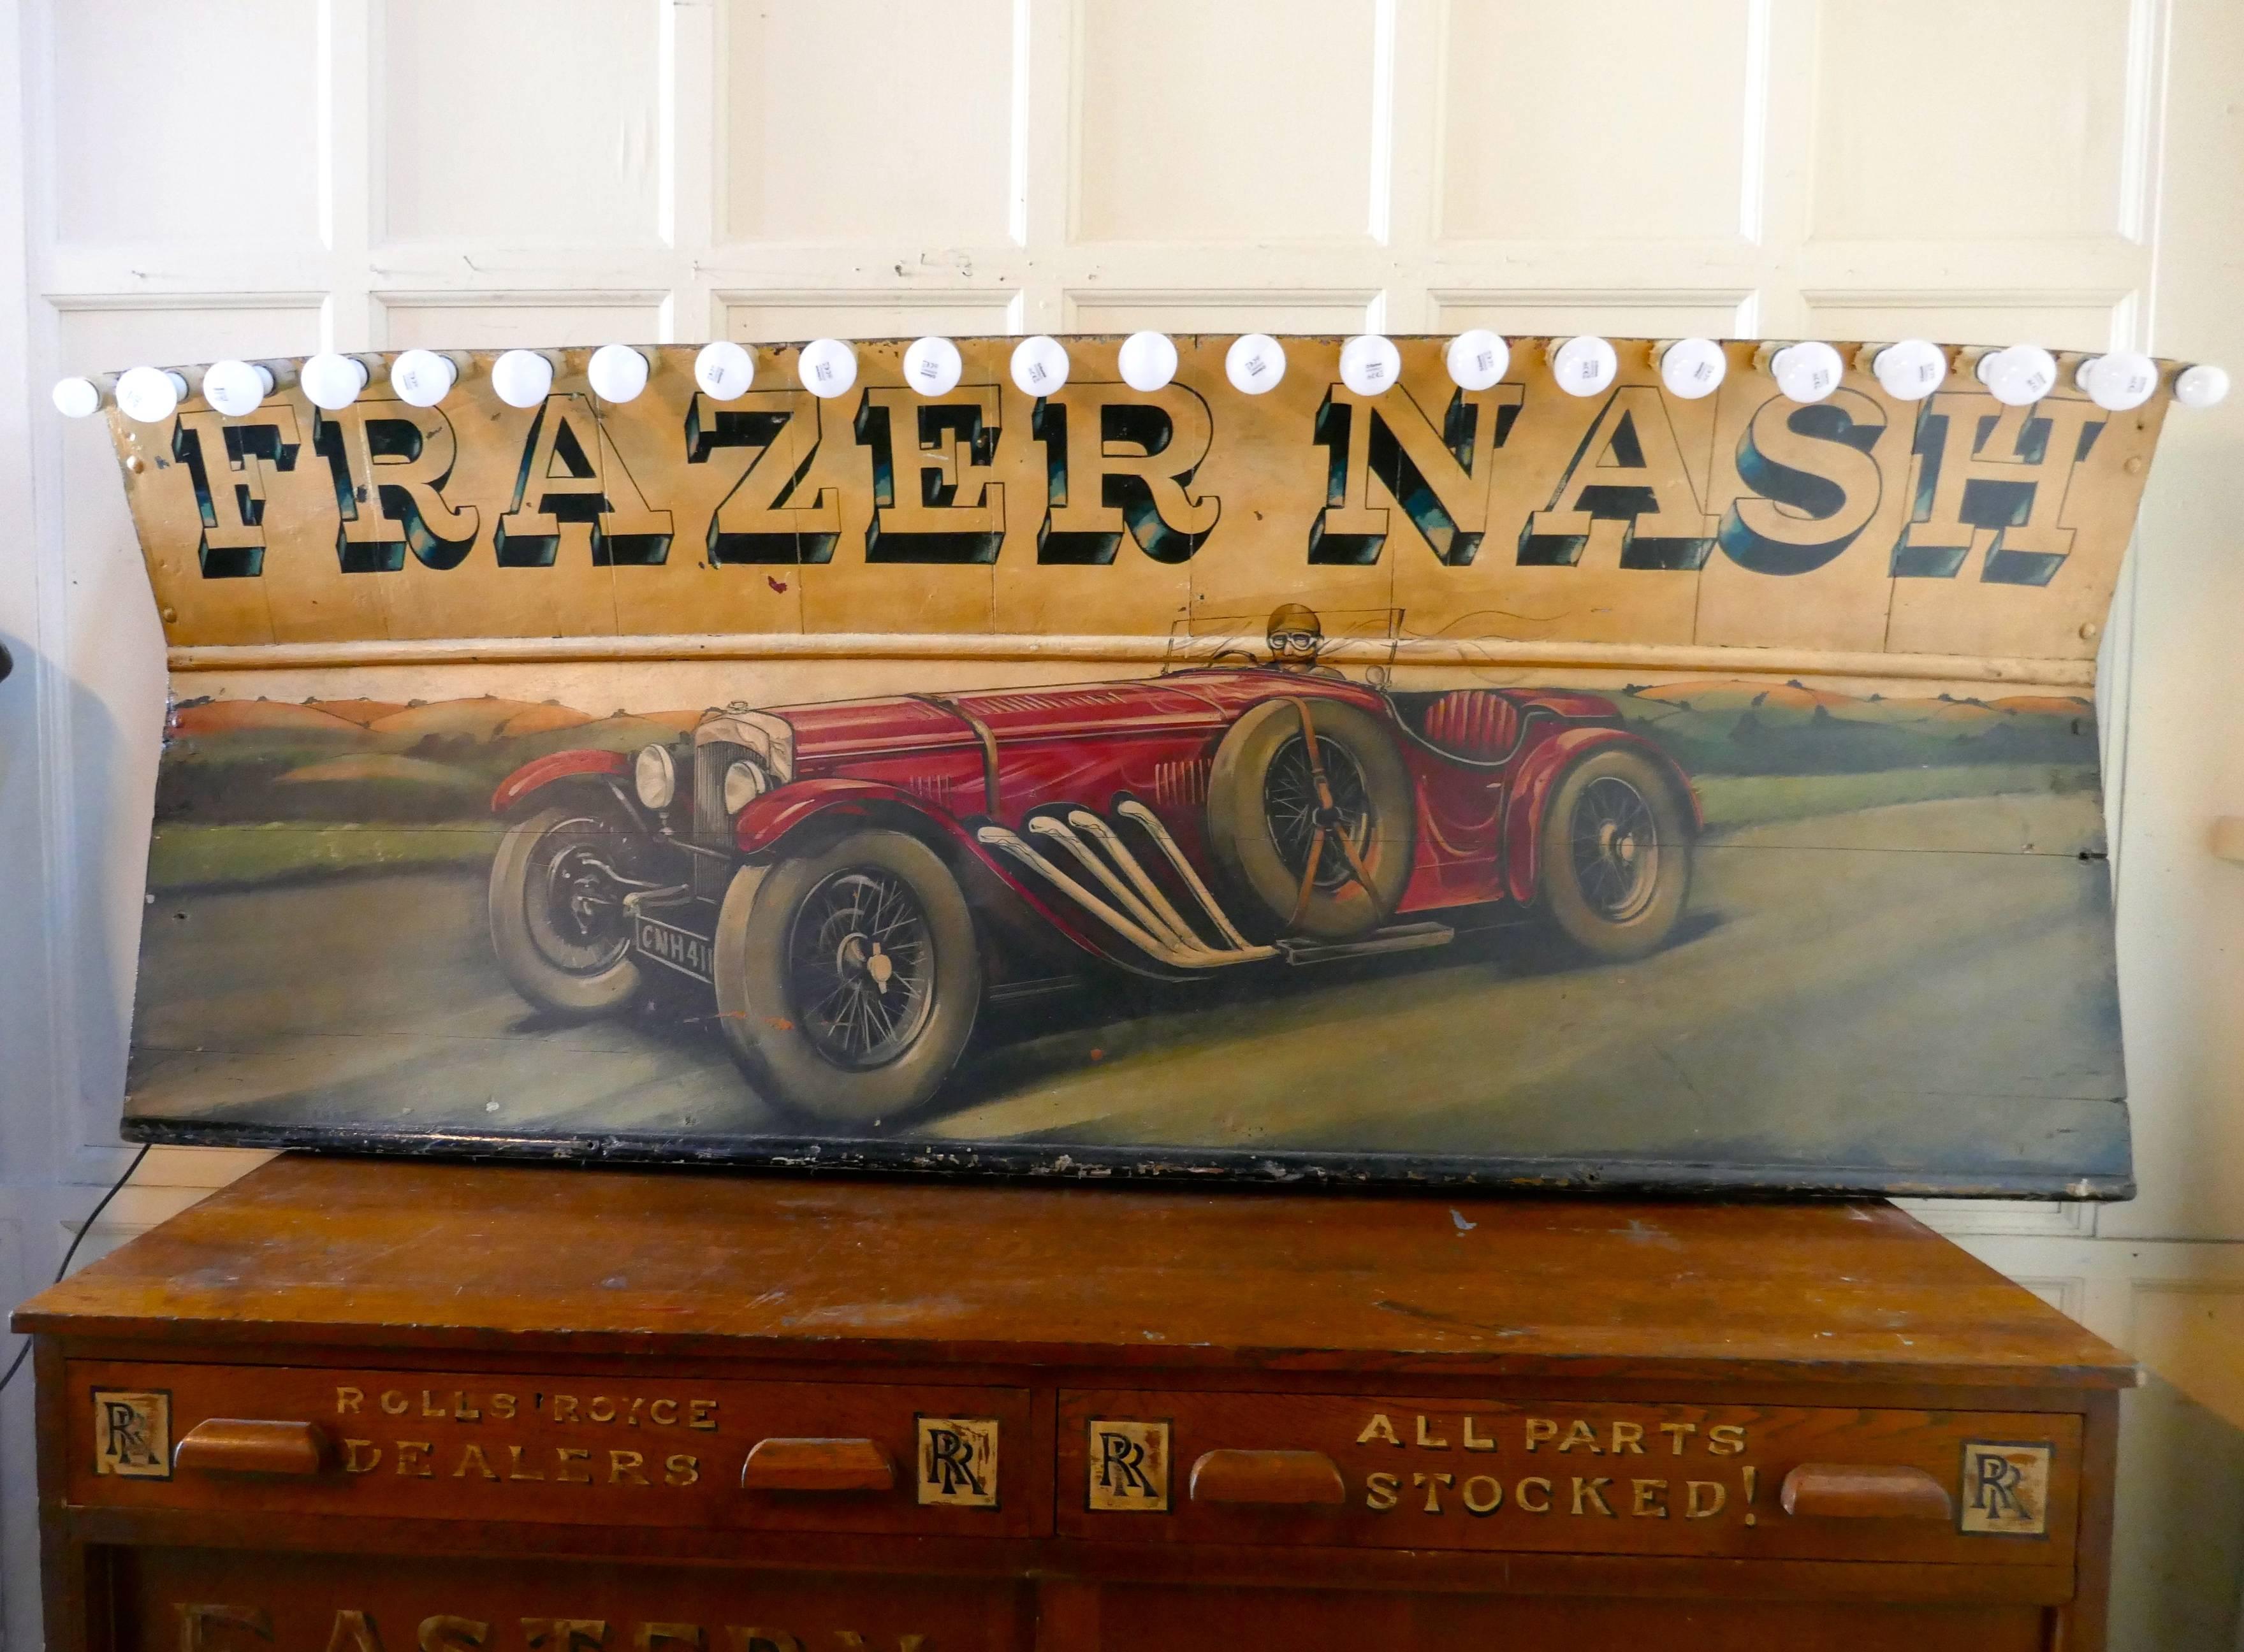 20th Century Frazer Nash Huge Illuminated Advertising Painted Trade Sign For Sale